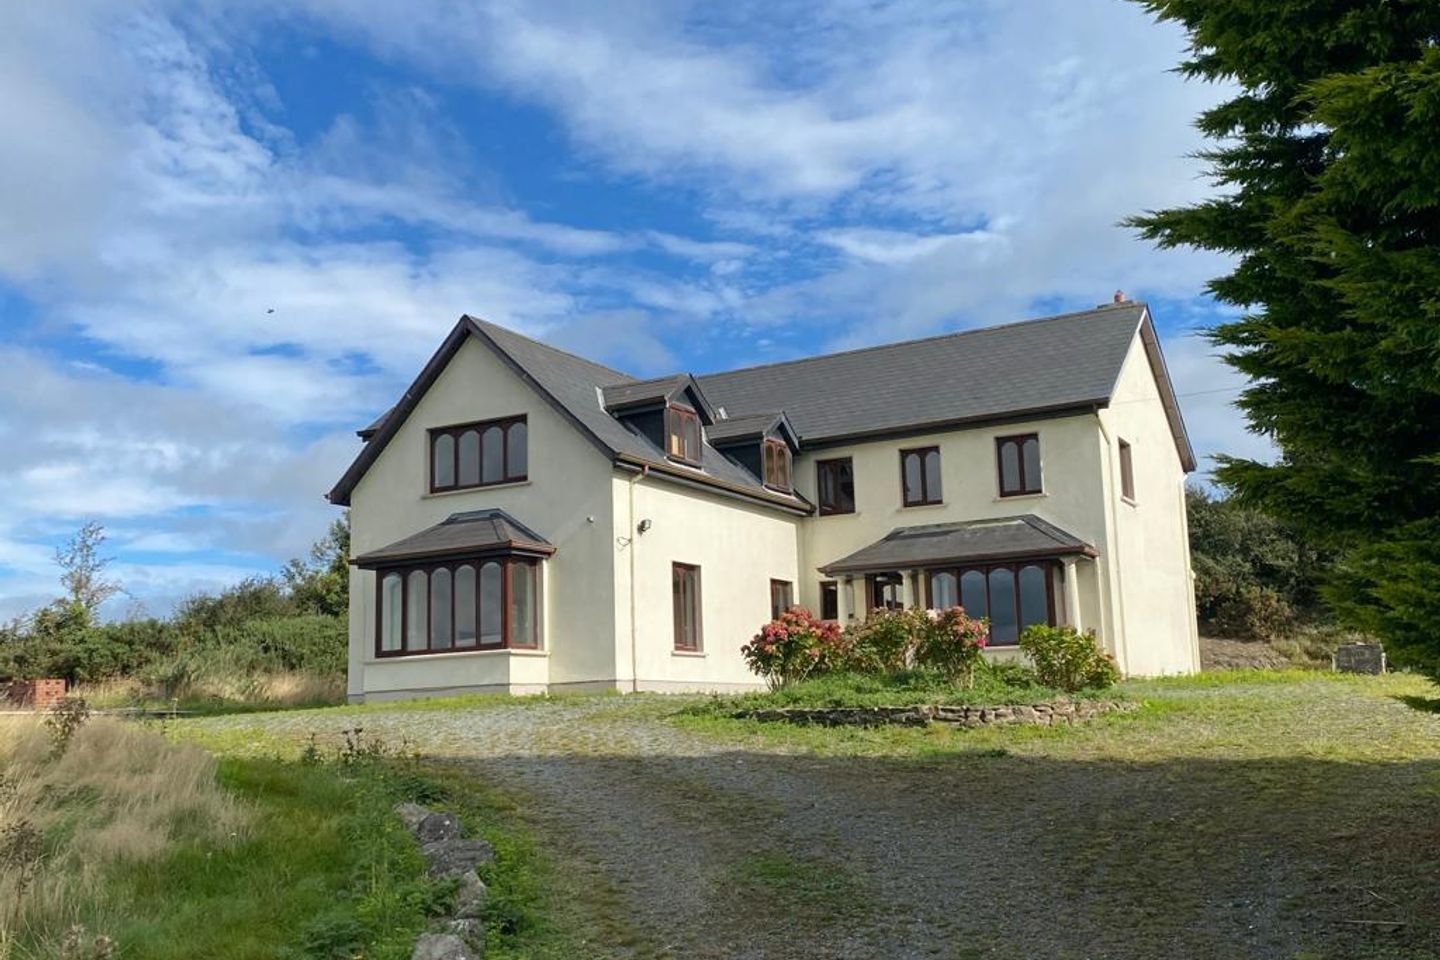 The Pines, Nook, Arthurstown, Co. Wexford